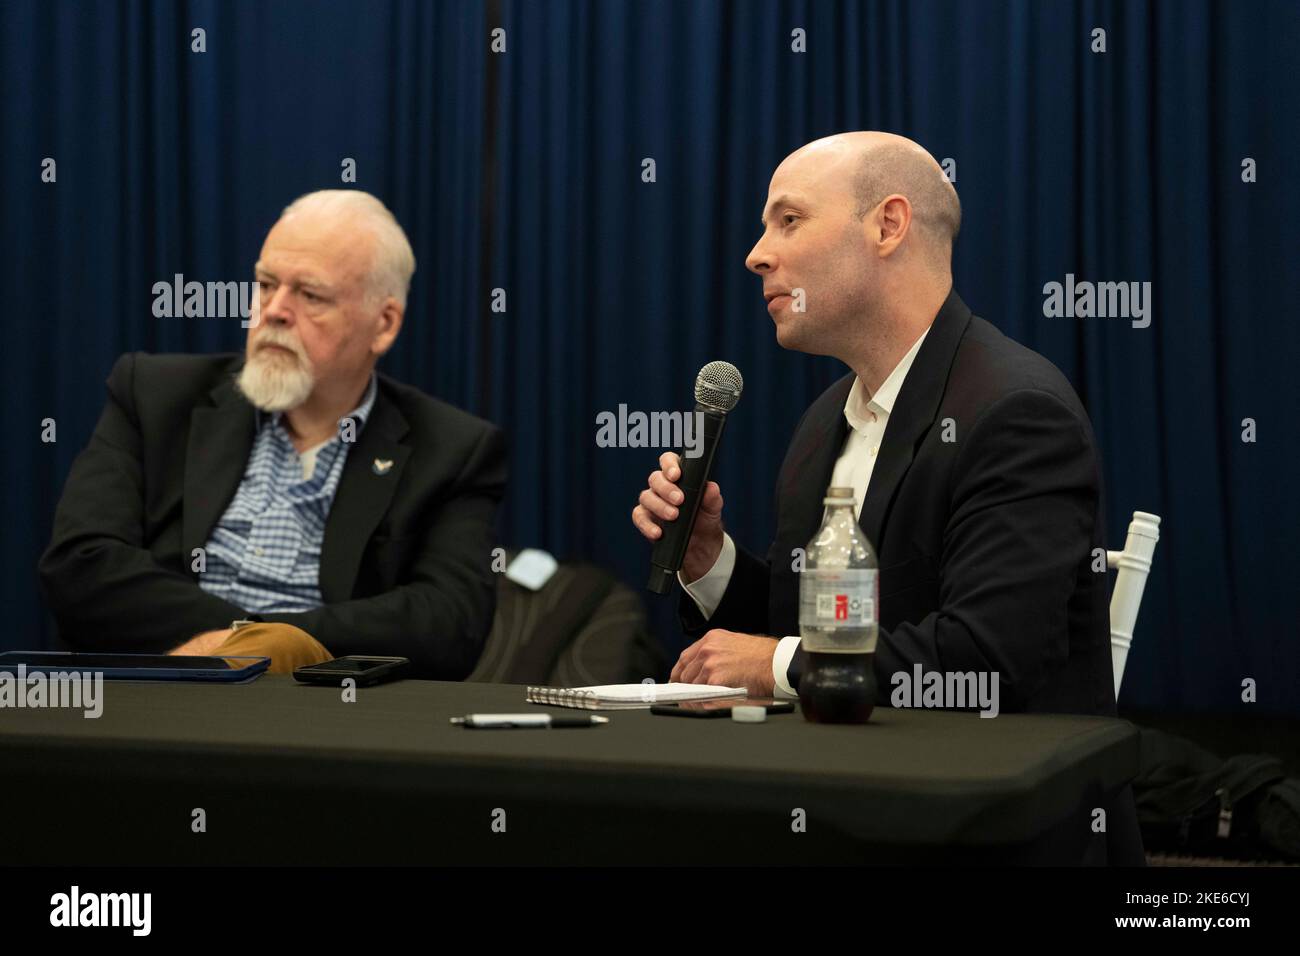 McAllen Texas USA, November 9, 2022: Long-time Republican political consultant DAVE CARNEY, left, listens as Gardner Pate, chairman of Texas Gov. Greg Abbott's re-election campaign, gives a post-election press conference talking about methods and strategy in guiding Abbott to a re-election victory the previous day. Abbott defeated Democratic challenger Beto O'Rourke to win his third term in office. ©Bob Daemmrich Stock Photo